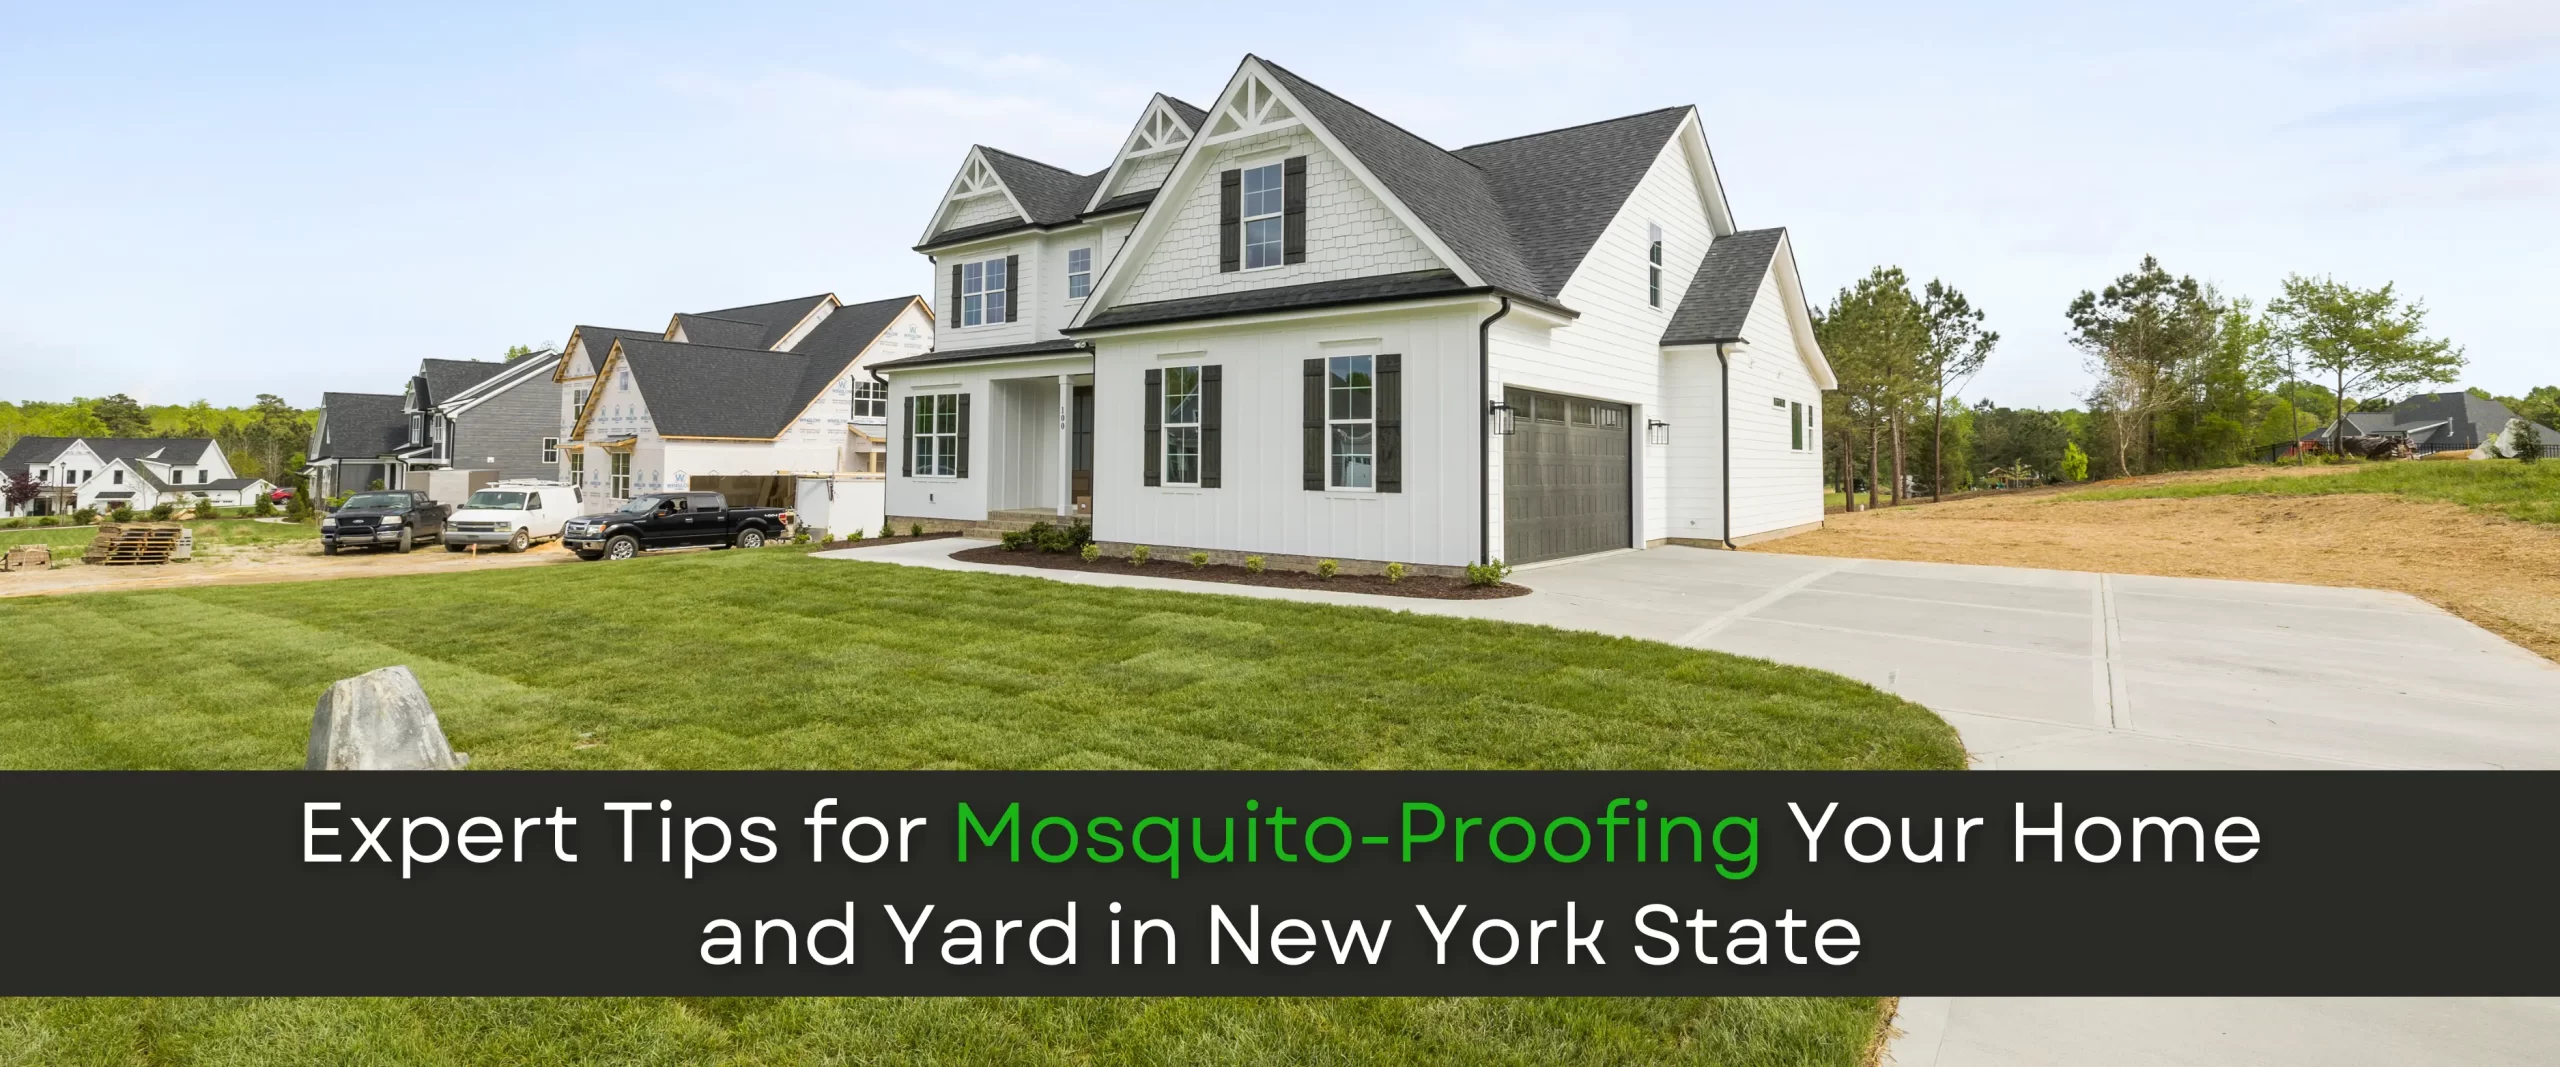 Mosquito-Proofing Your Home and Yard